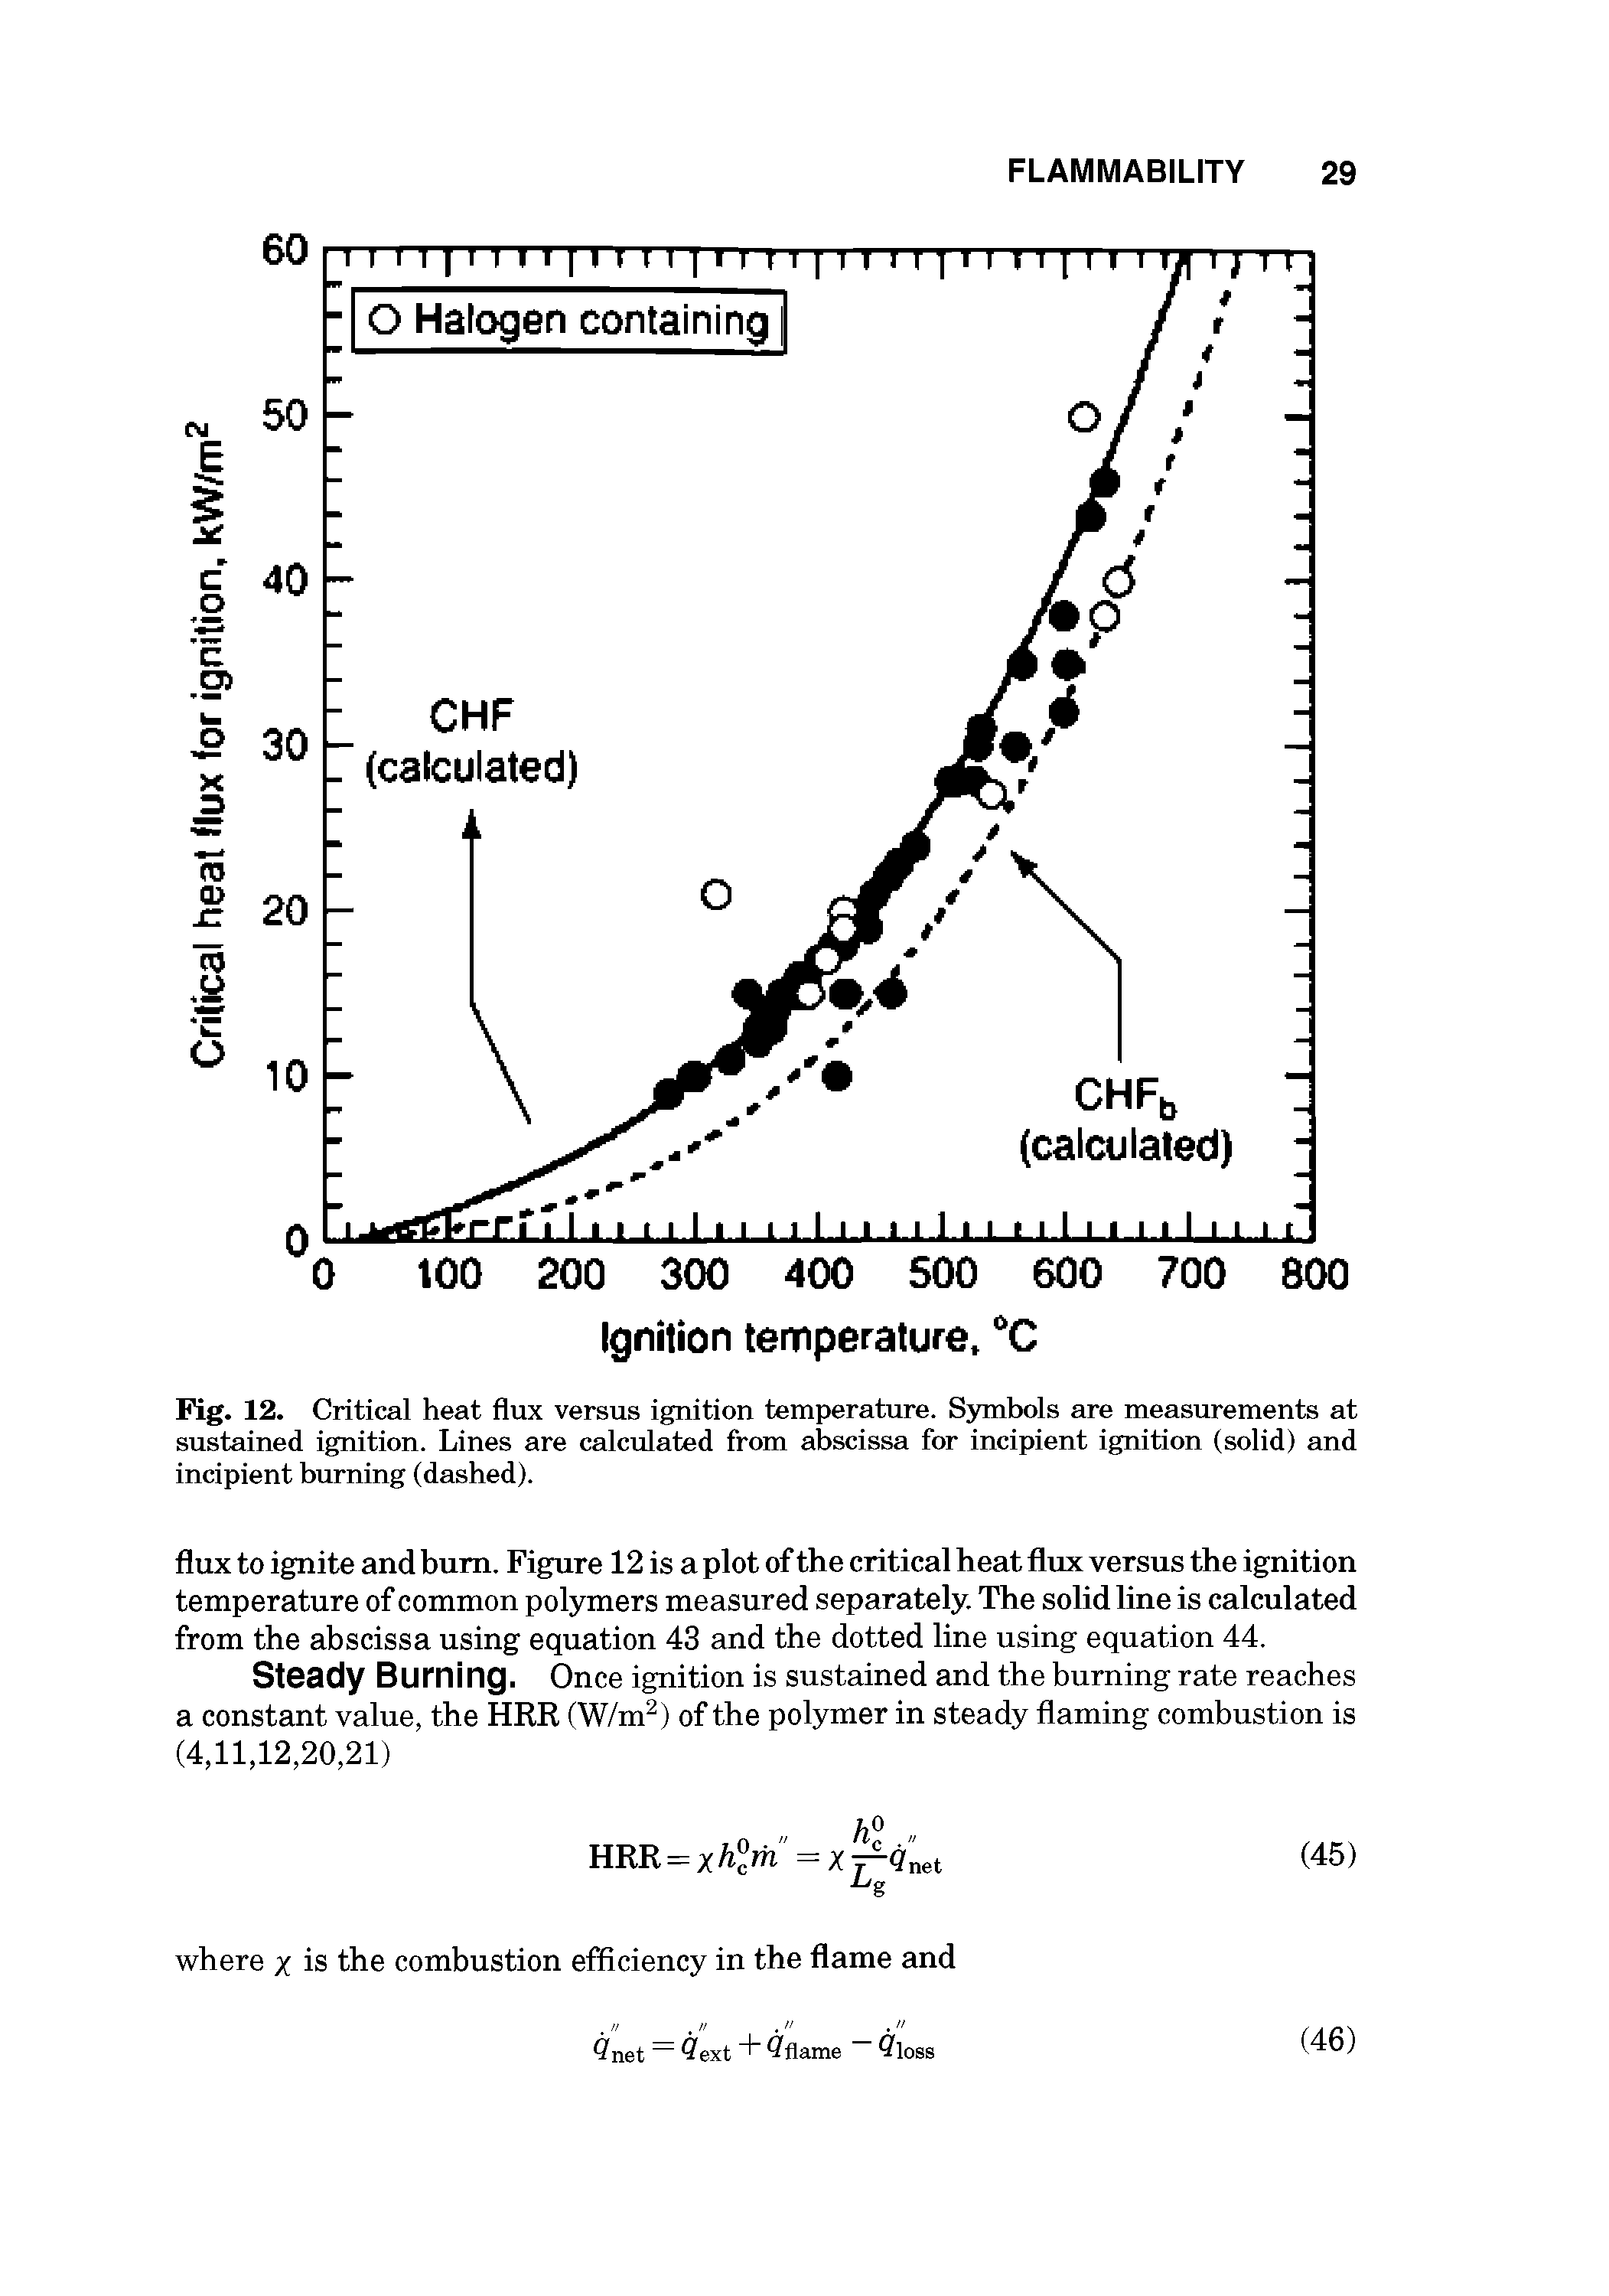 Fig. 12. Critical heat flux versus ignition temperature. Symbols are measurements at sustained ignition. Lines are calculated from abscissa for incipient ignition (solid) and incipient burning (dashed).